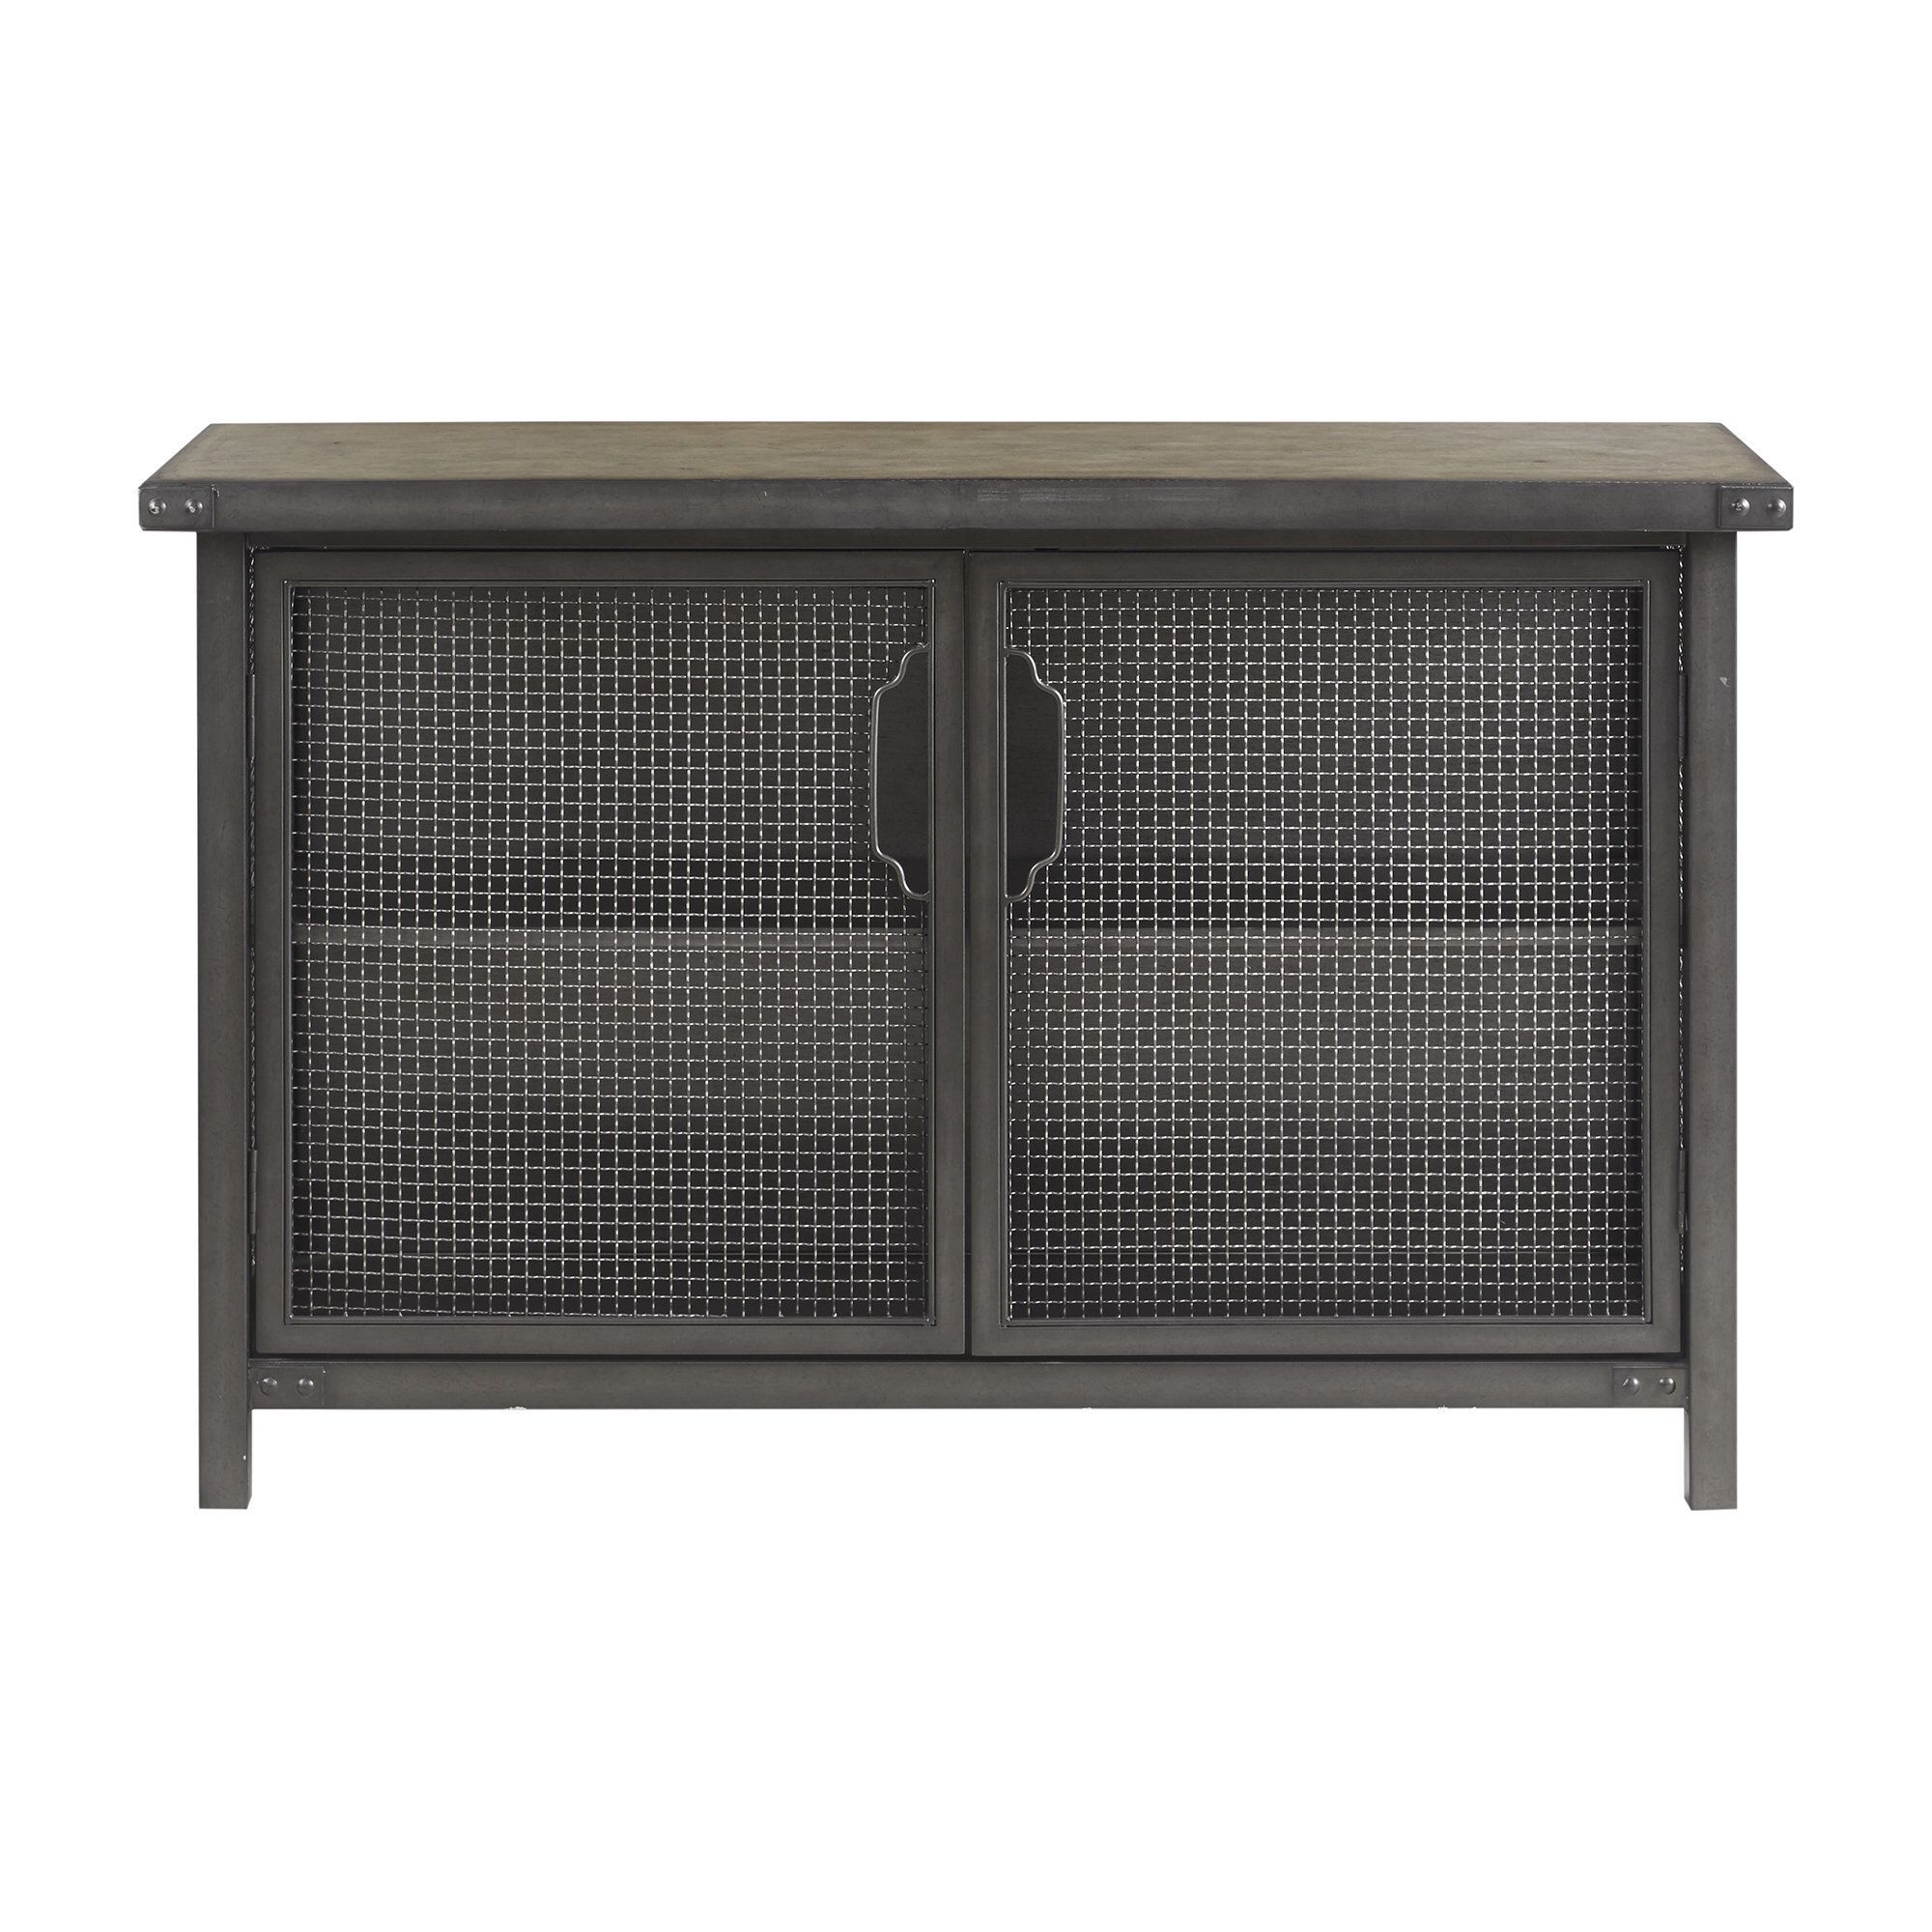 Casolino Sideboard | Dawn | Sideboard, Sideboard Cabinet With Regard To Casolino Sideboards (View 2 of 30)